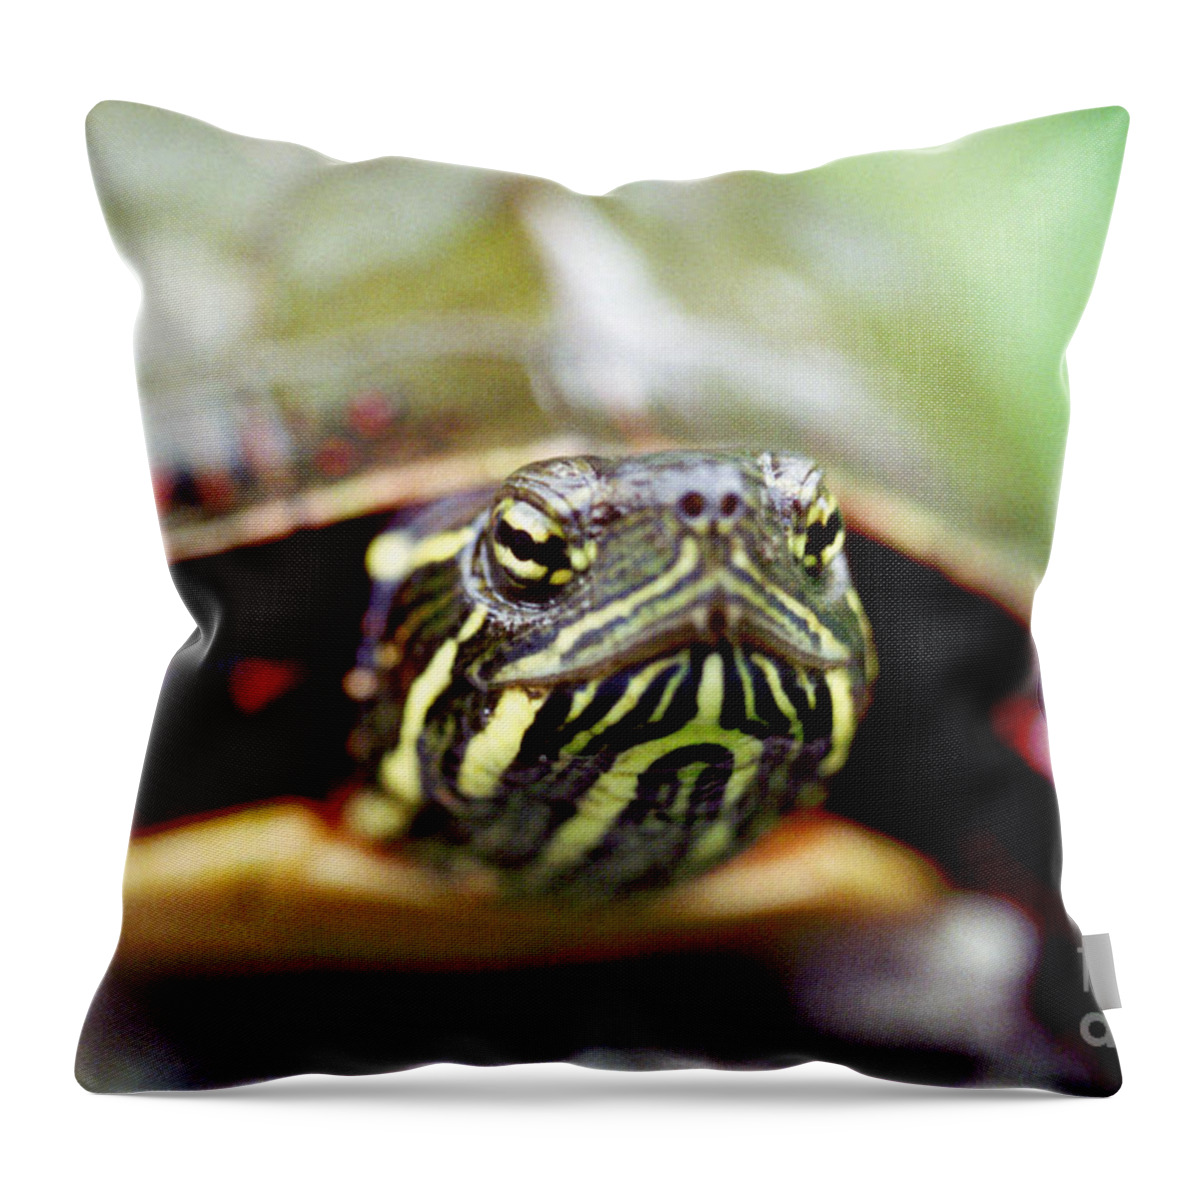 Animal Throw Pillow featuring the photograph Painted Turtle by Ted Kinsman